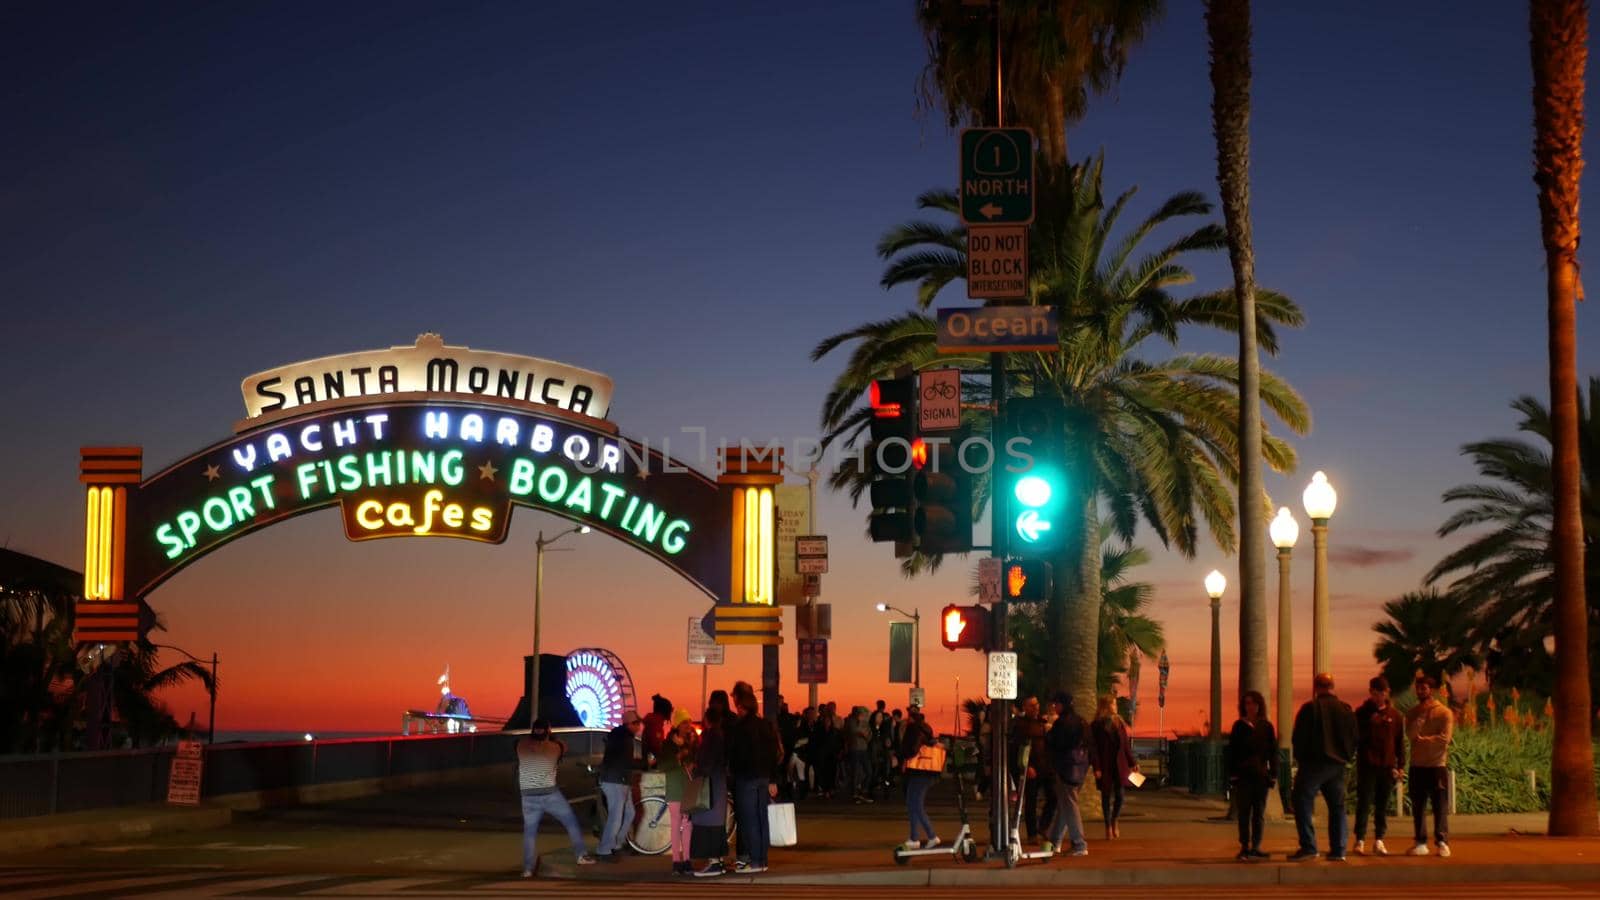 SANTA MONICA, LOS ANGELES CA USA - 19 DEC 2019: Summertime iconic vintage symbol. Classic illuminated retro sign on pier. California summertime aesthetic. Glowing lettering on old-fashioned signboard.